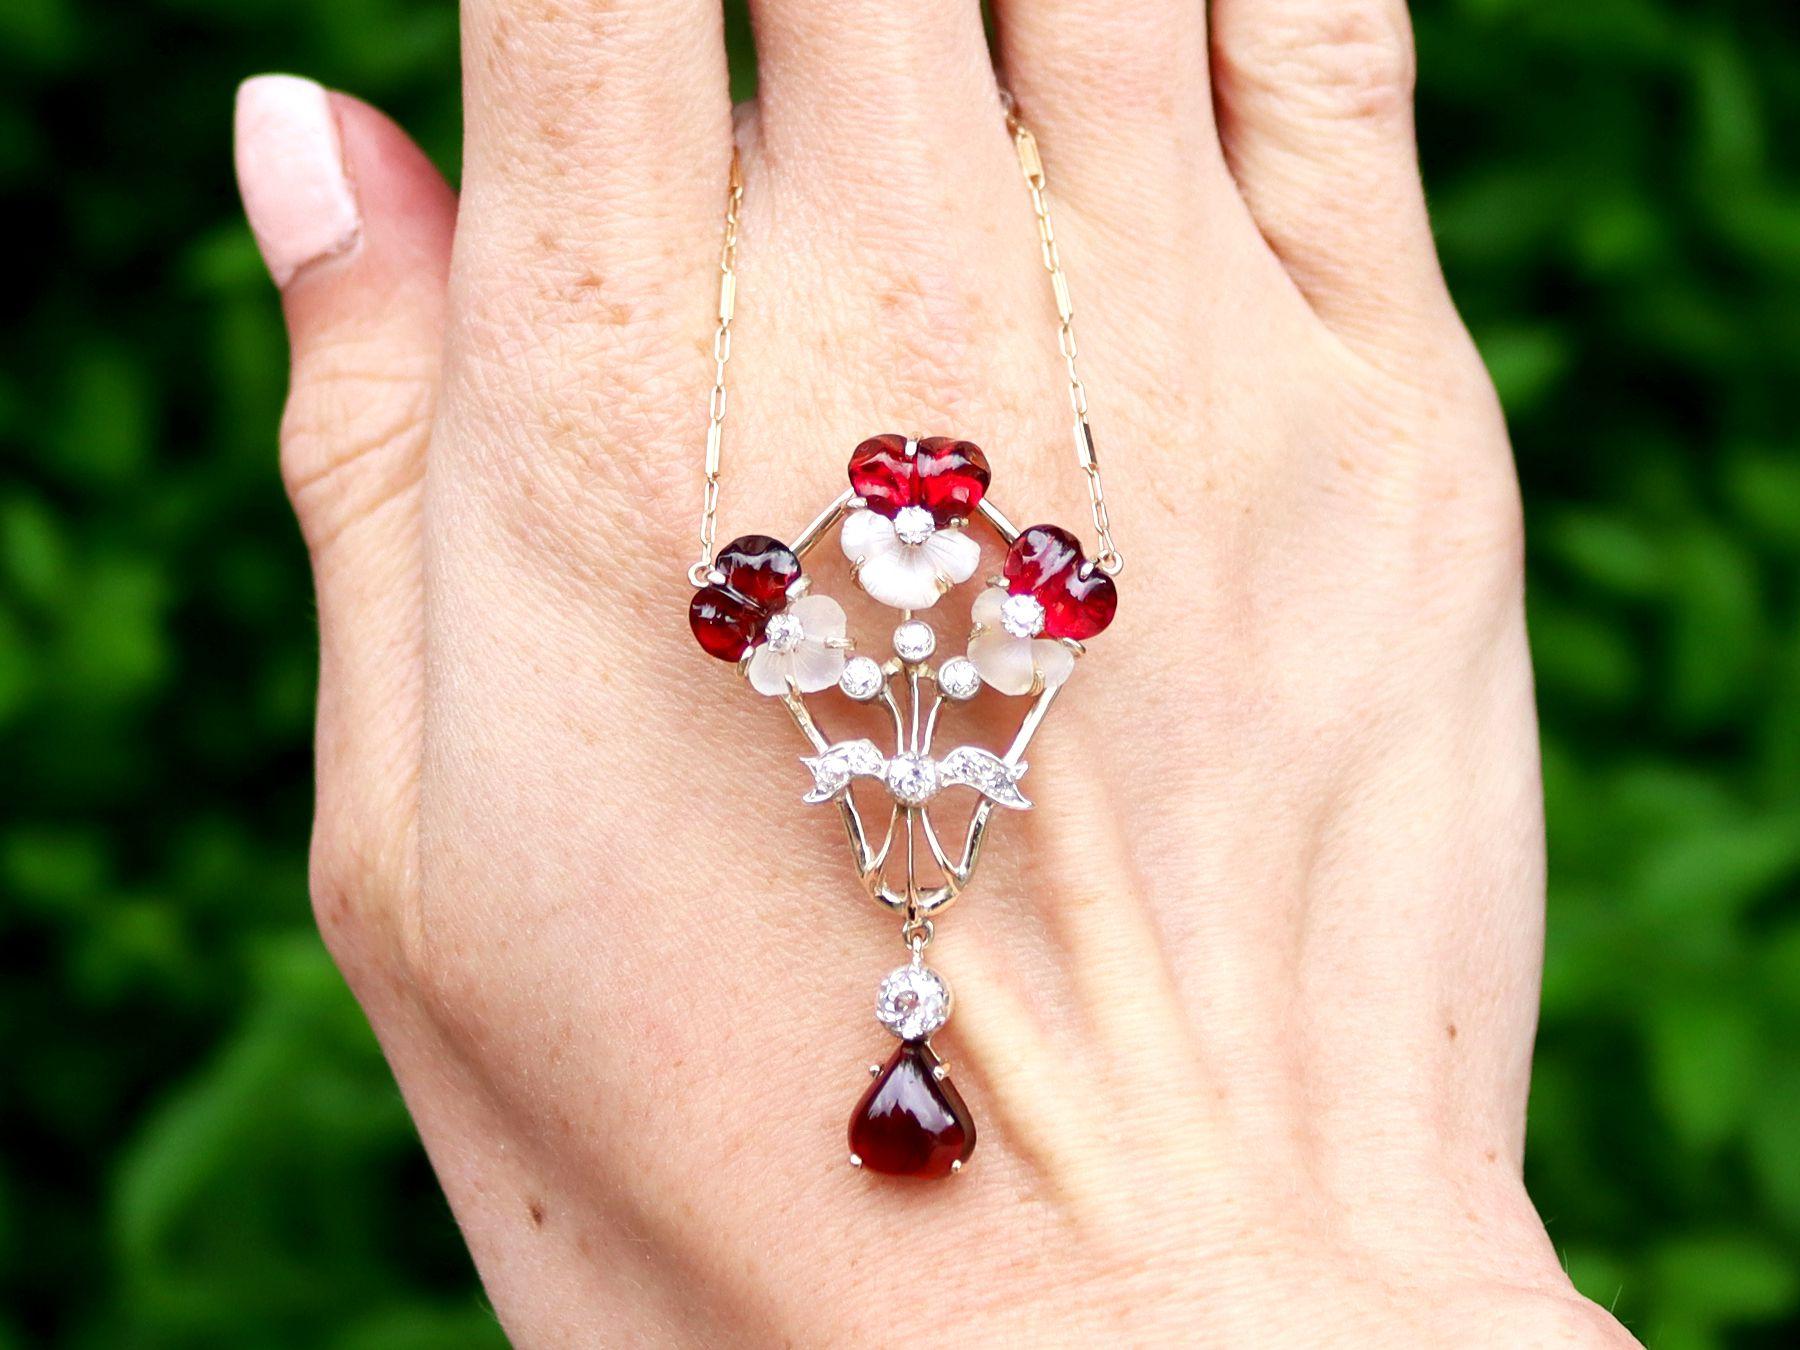 A stunning antique Victorian 6.92 carat garnet, 3.50 carat moonstone and 1.23 carat diamond, 14 carat yellow gold and 14ct white gold set pendant; part of our diverse antique jewellery collections.

This stunning, fine and impressive antique pendant